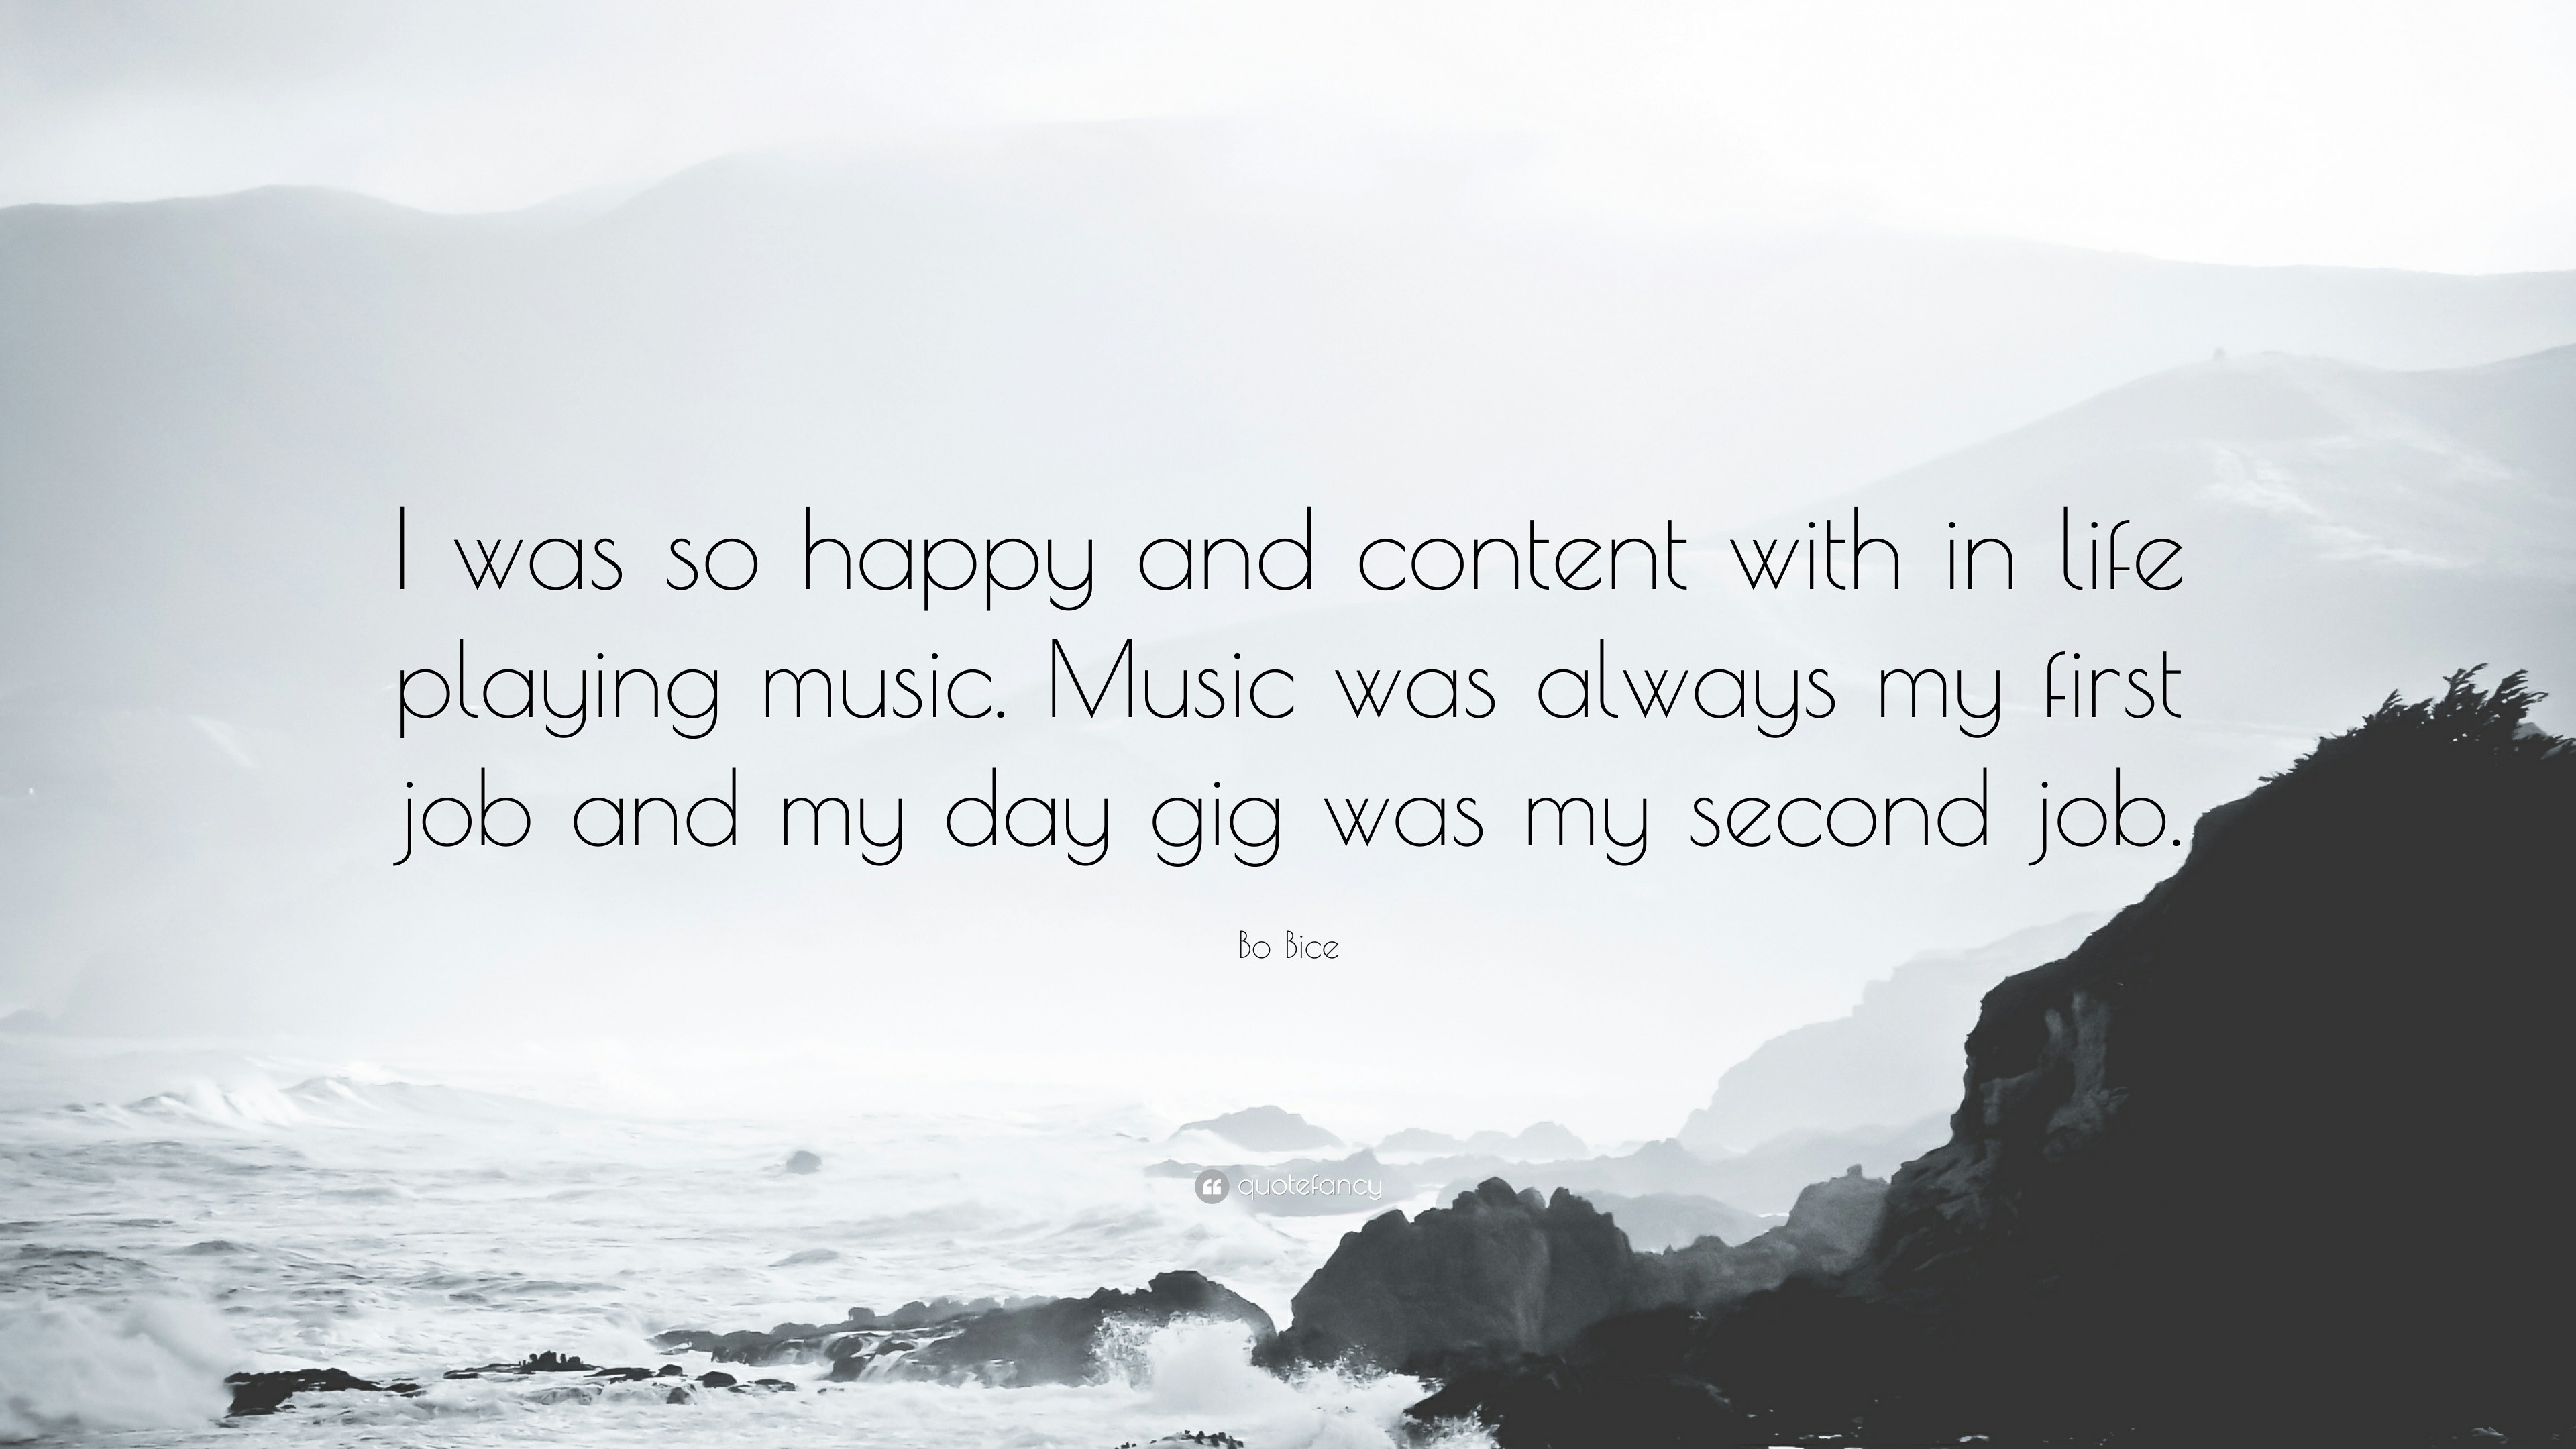 Bo Bice Quote “I was so happy and content with in life playing music